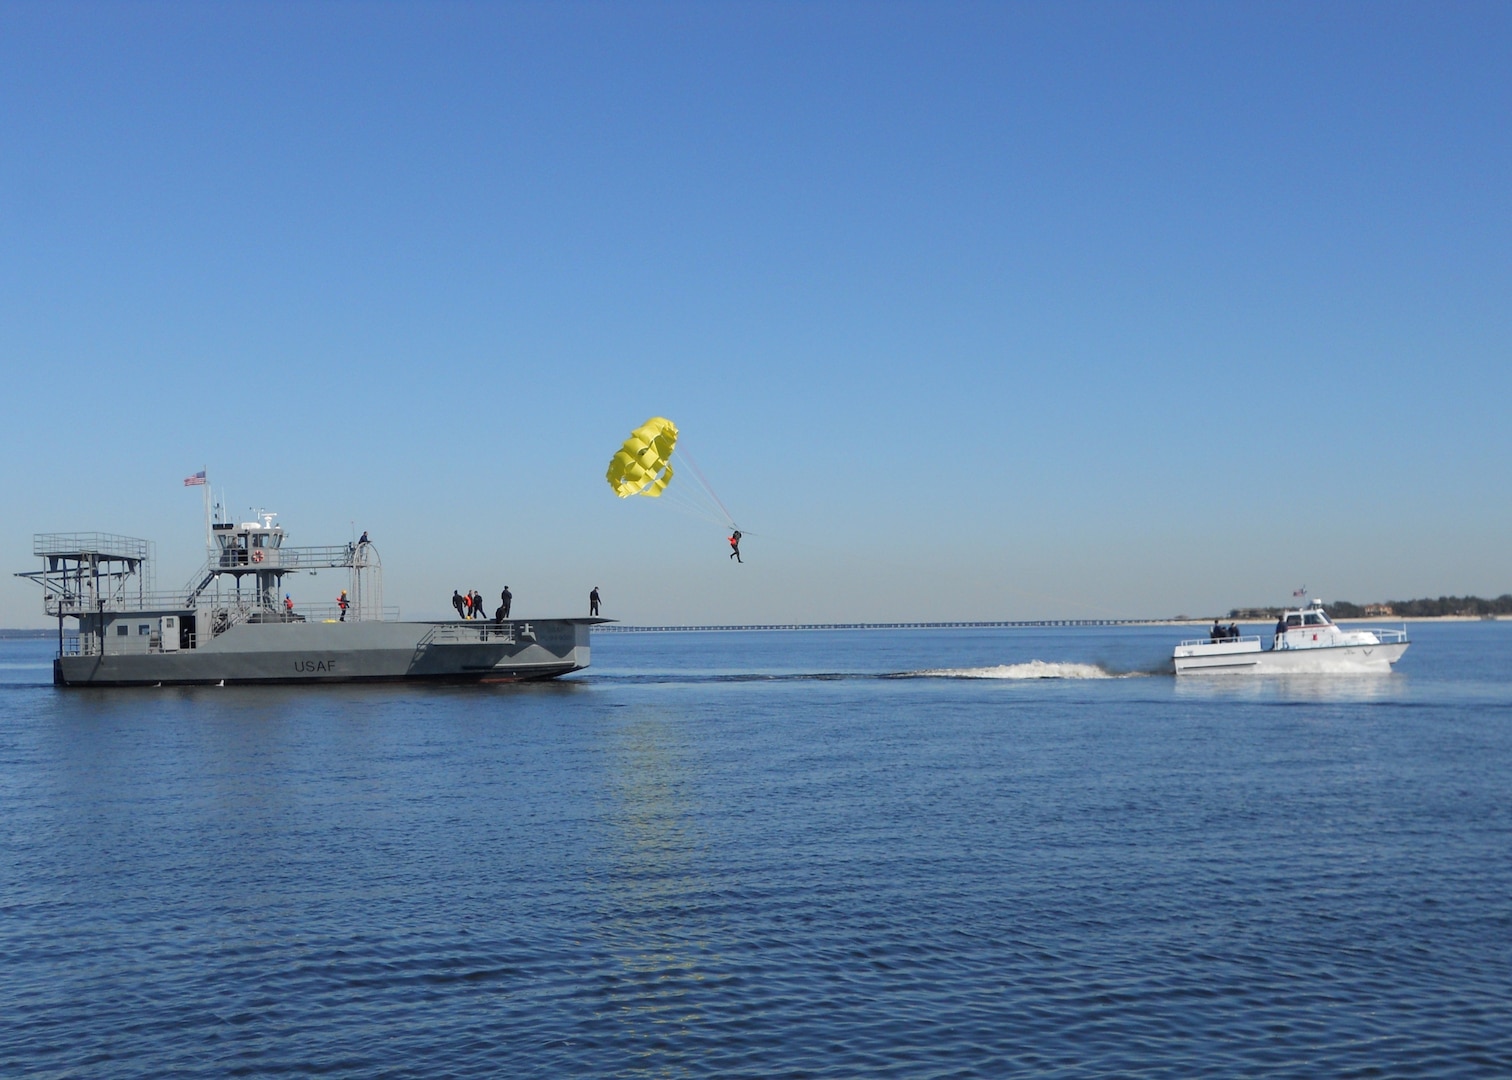 A student is launched for parasail training from the Big Dawg’s front flight deck.